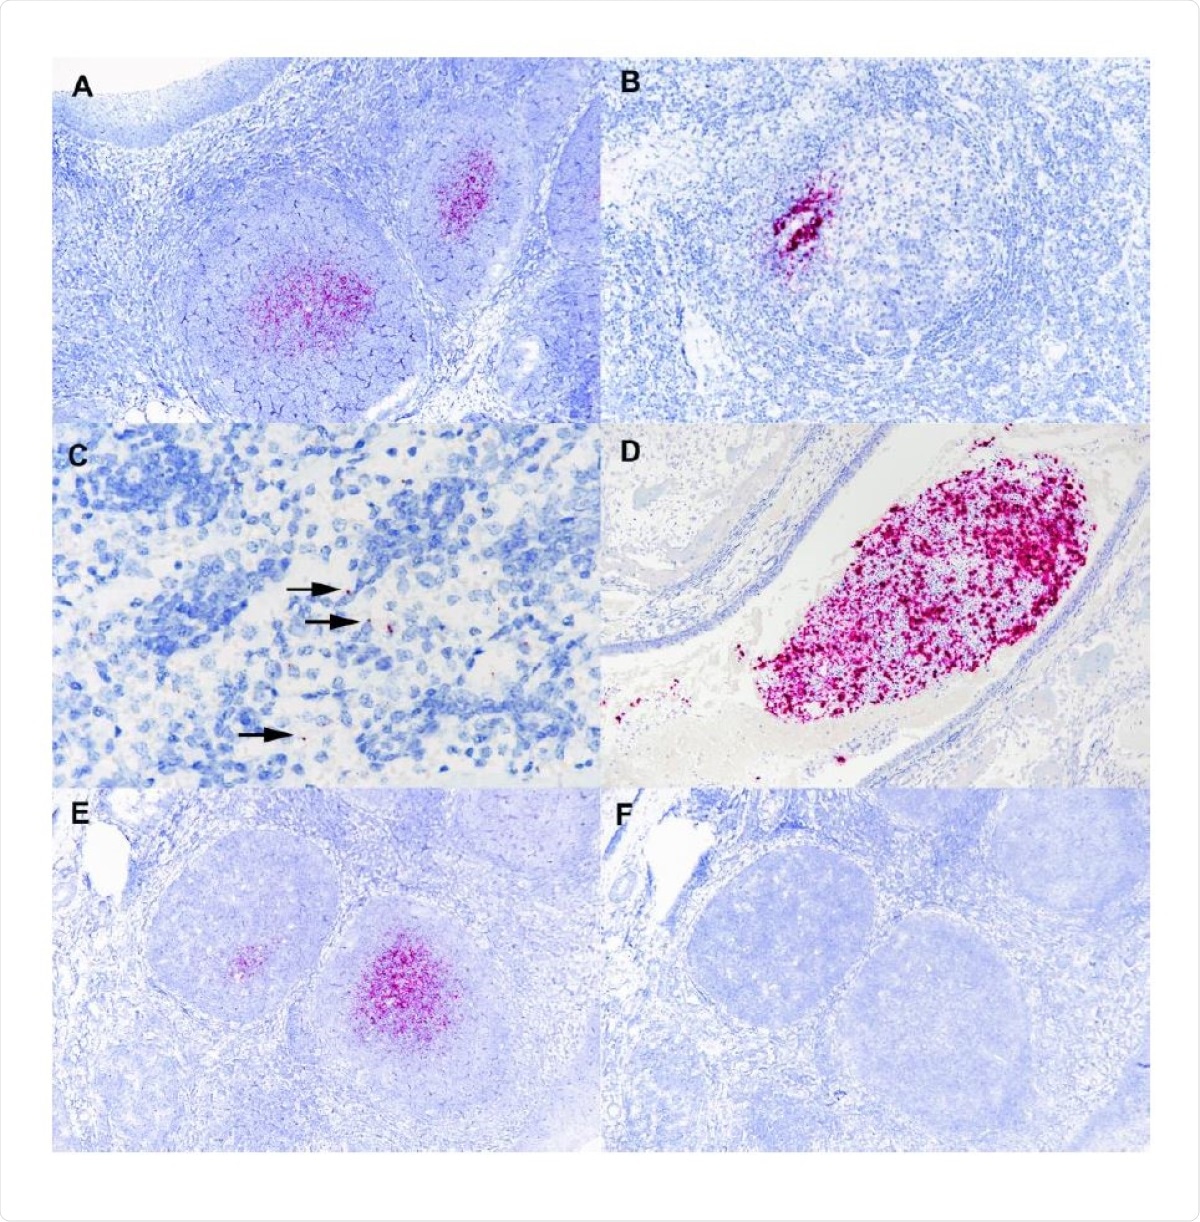 Tissues from white-tailed deer fawn inoculated intranasally with SARS-CoV-2 and examined 21 days later. Note intense labeling of viral RNA in the centers of lymphoid follicles (A) located subjacent to tonsillar epithelium (upper left). Note labeling for SARS-CoV-2 RNA within medial retropharyngeal lymph node follicle (B) and mediastinal lymph node medulla (C). Nasal turbinate lumen contains aggregate of mucus, cells and debris with intense labeling for SARS-CoV-2 RNA (D). Adjacent microscopic sections demonstrate intense labeling of lymphoid follicles with probe for SARS-CoV-2 RNA (E) but no labeling using the anti-genomic sense probe (F). ISH- RNAscope.